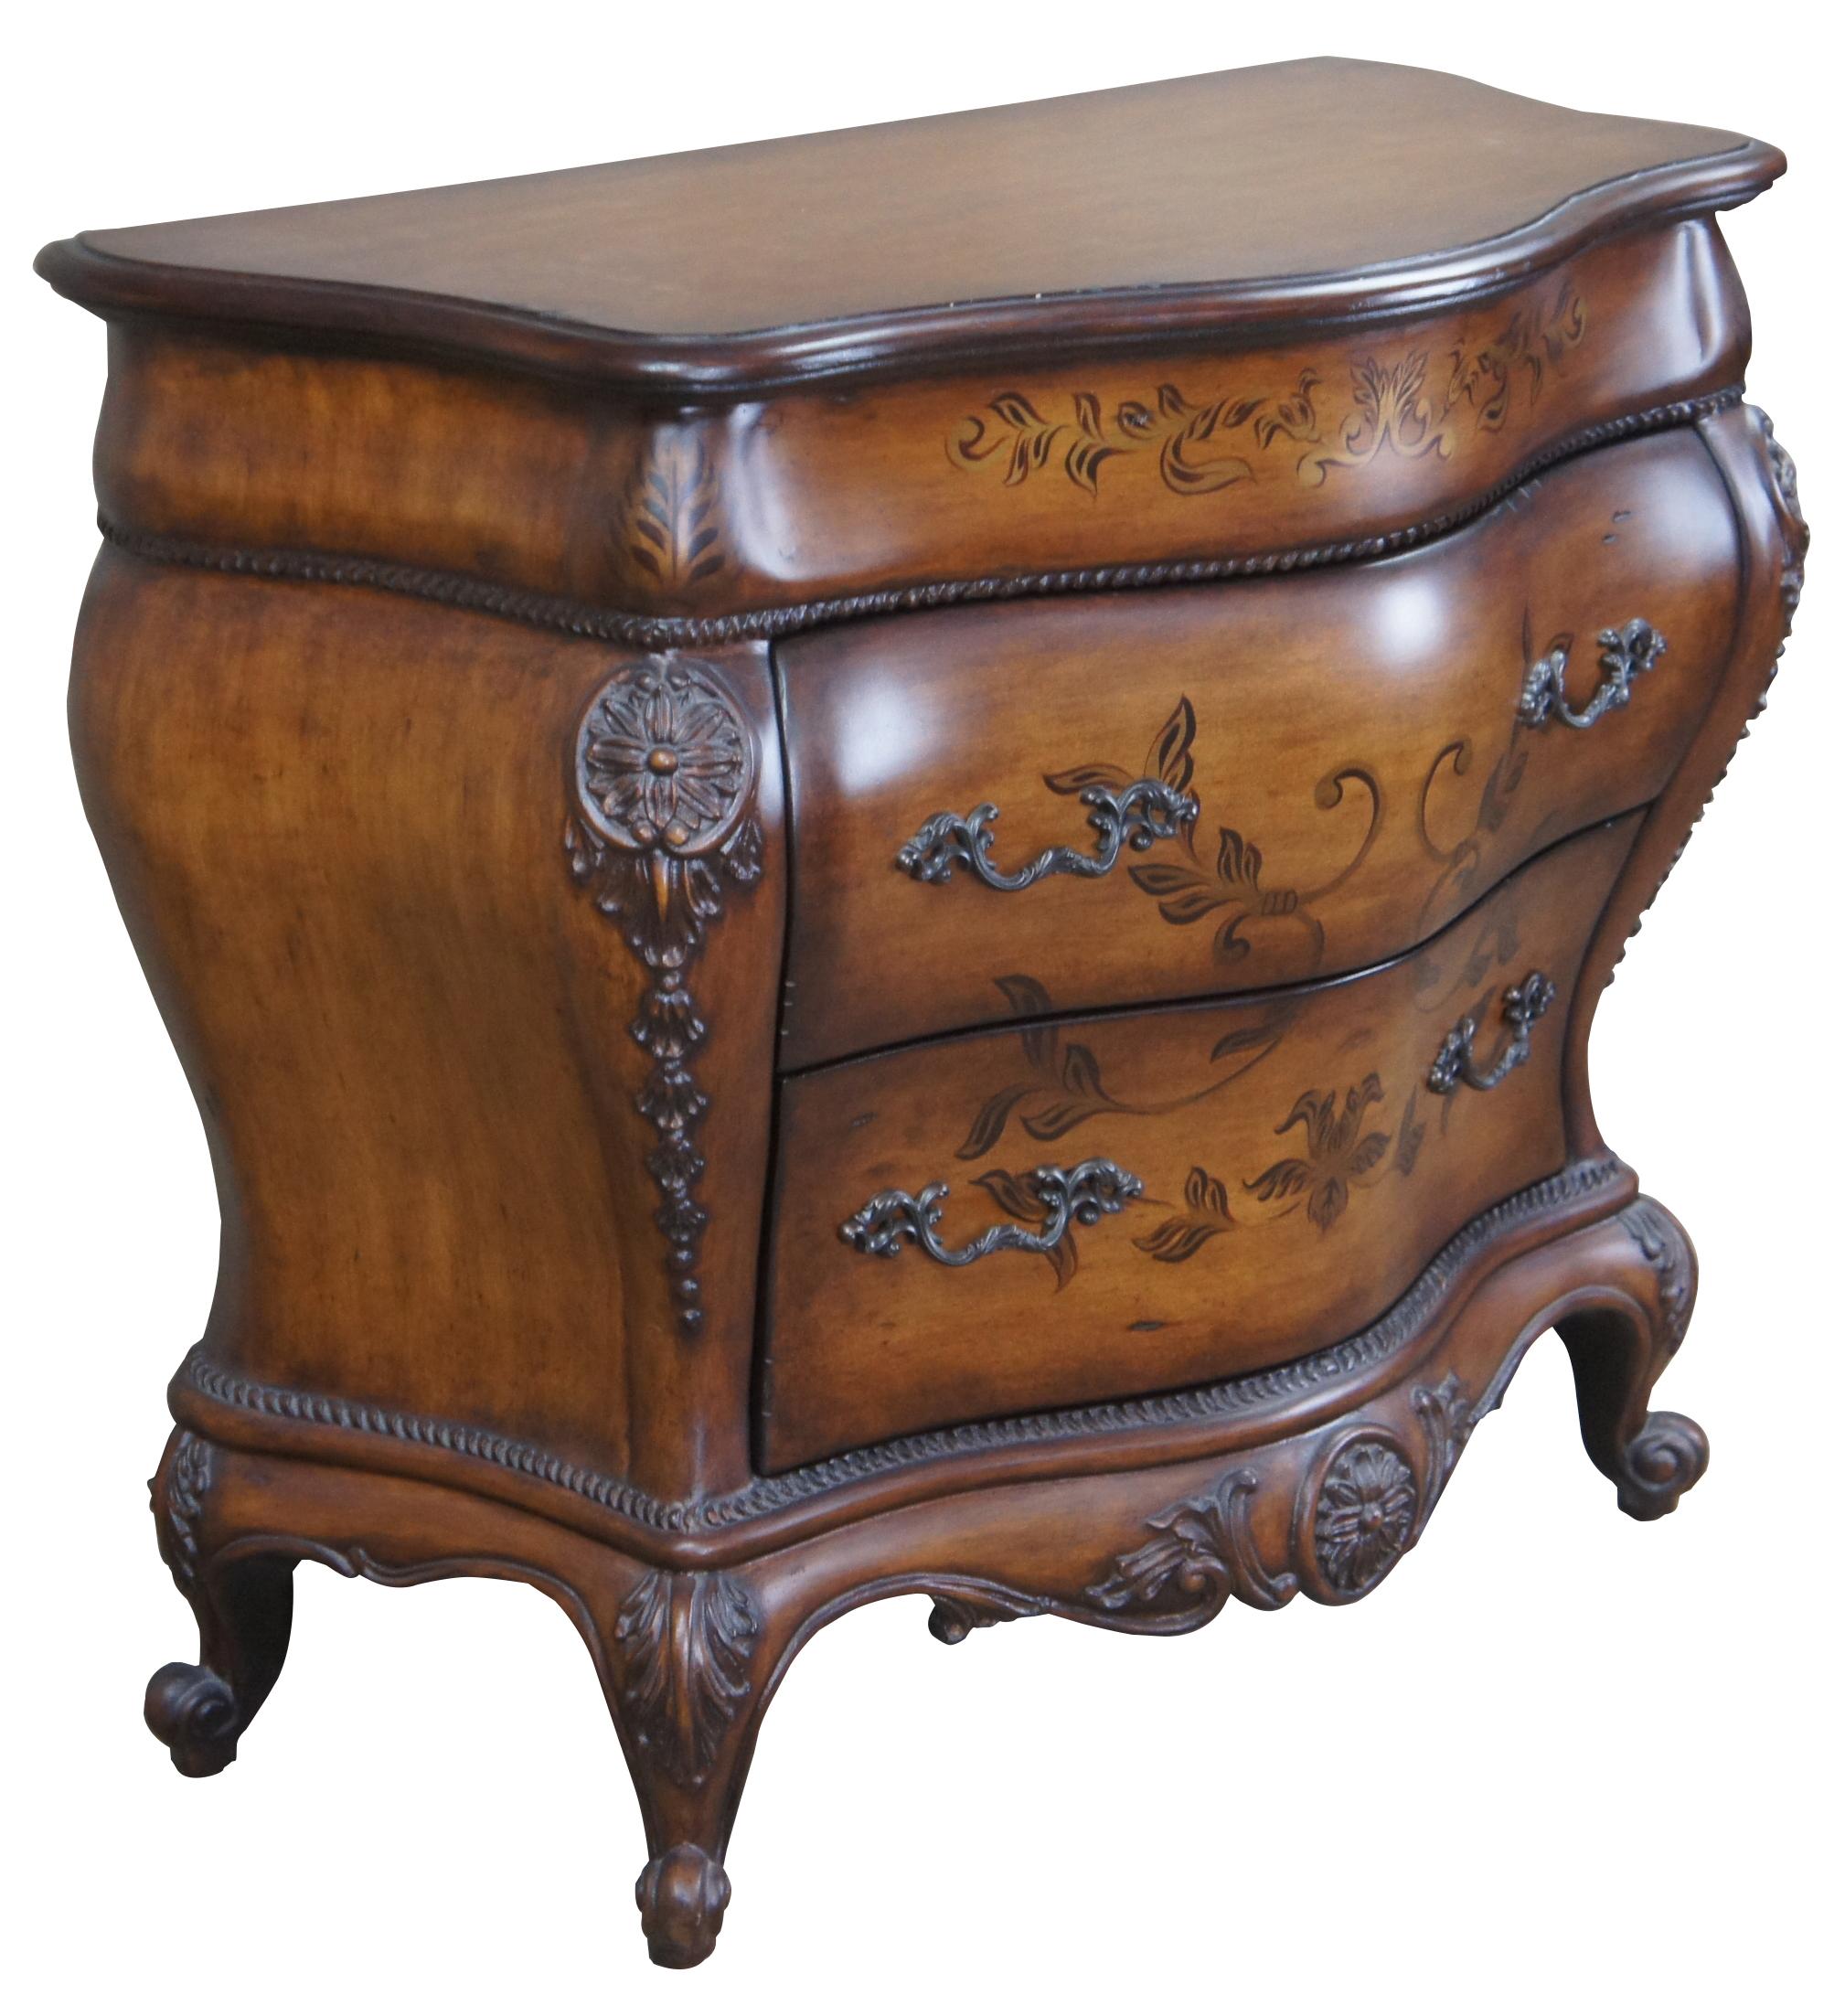 Pulaski Furniture late 20th century serpentine bombe chest. Italian revival with a walnut and Florentine painted finish. Features carved folitate and acanthus accents over cabriole legs and scrolled feet. Marked with tag along back side.
 